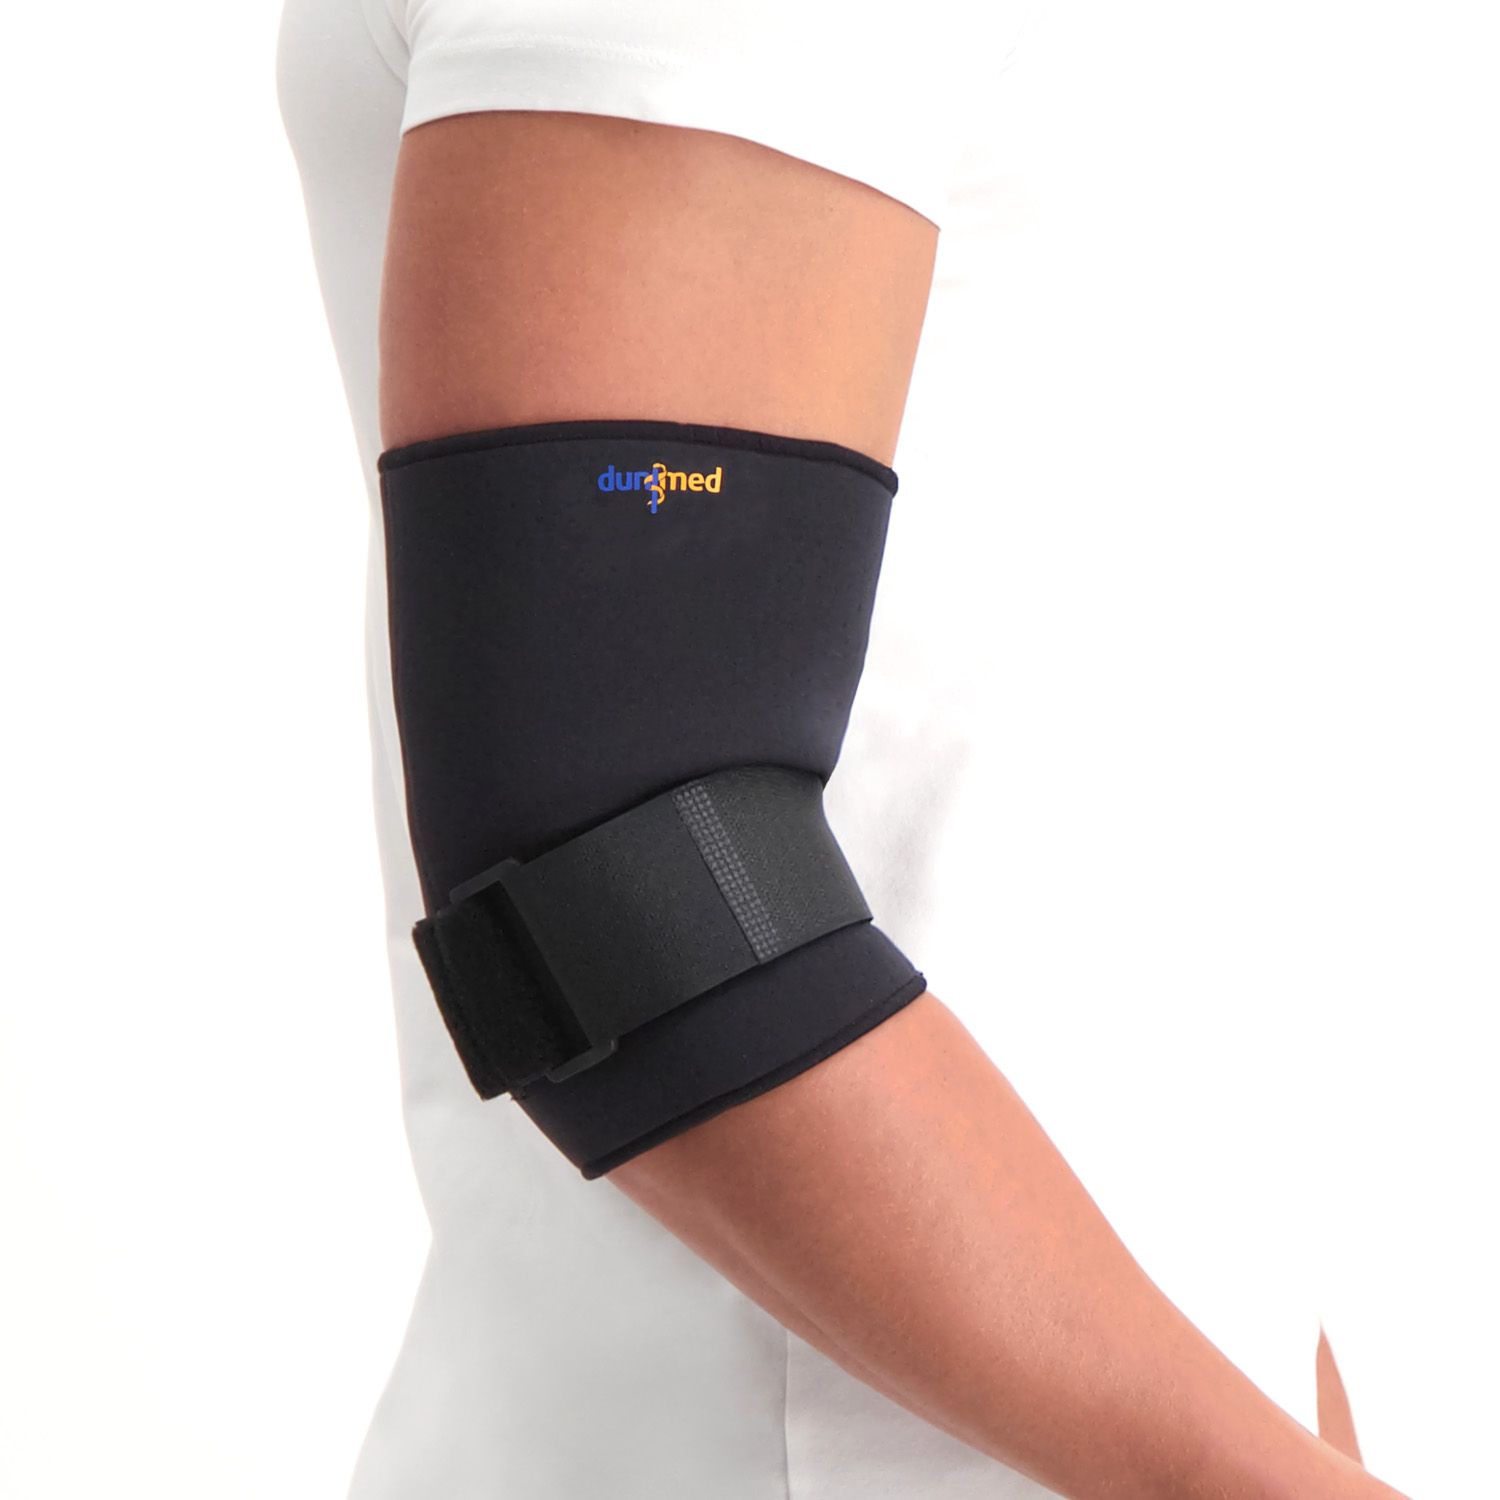 Dunimed elbow support